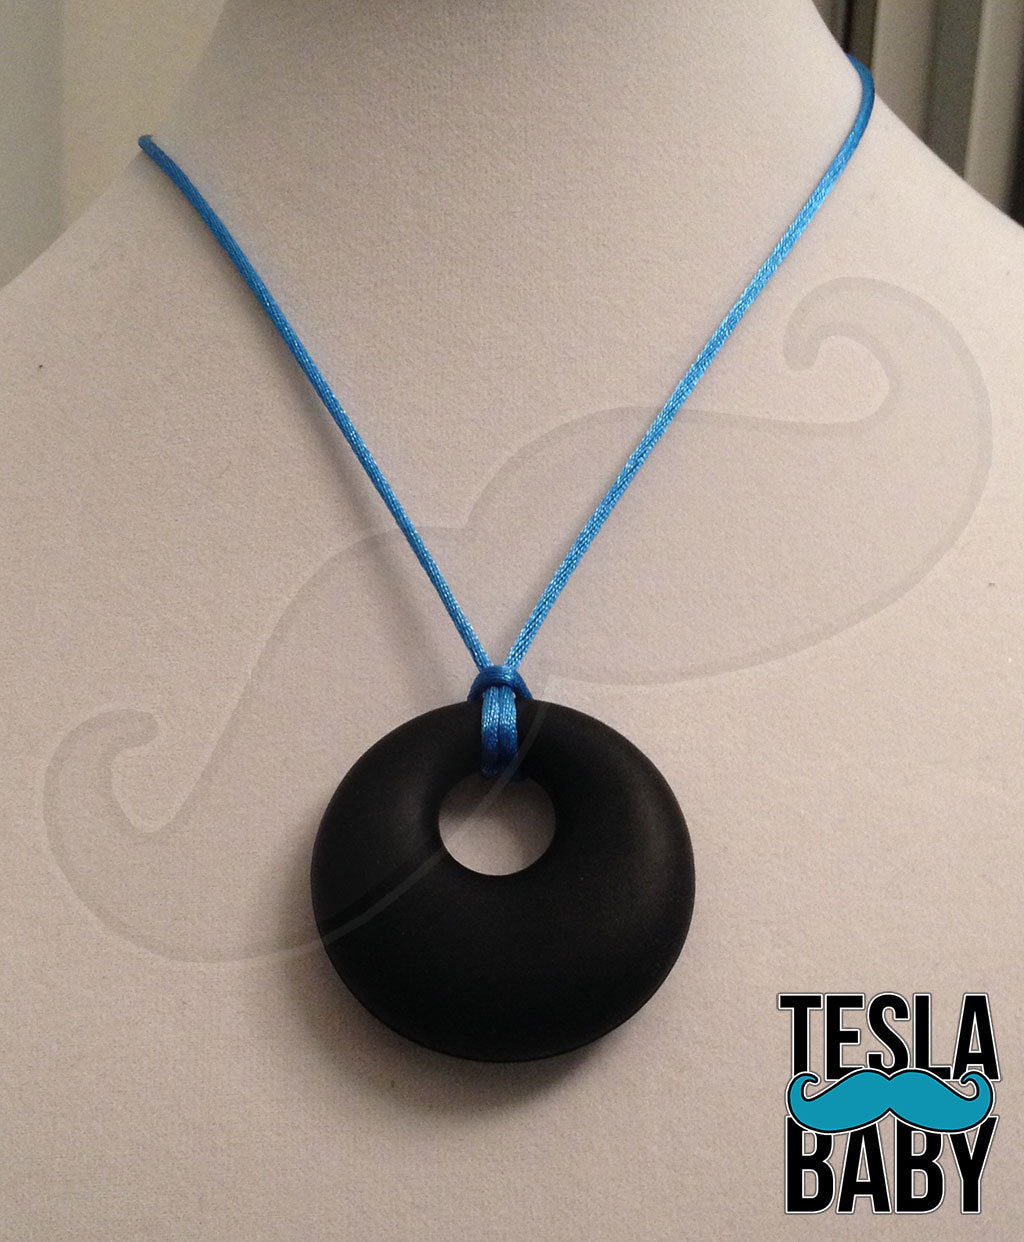 Silicone Pendant Necklace --  A 2 1/8" magenta silicone circular pendant; for fidgeting, sensory play, or teething.